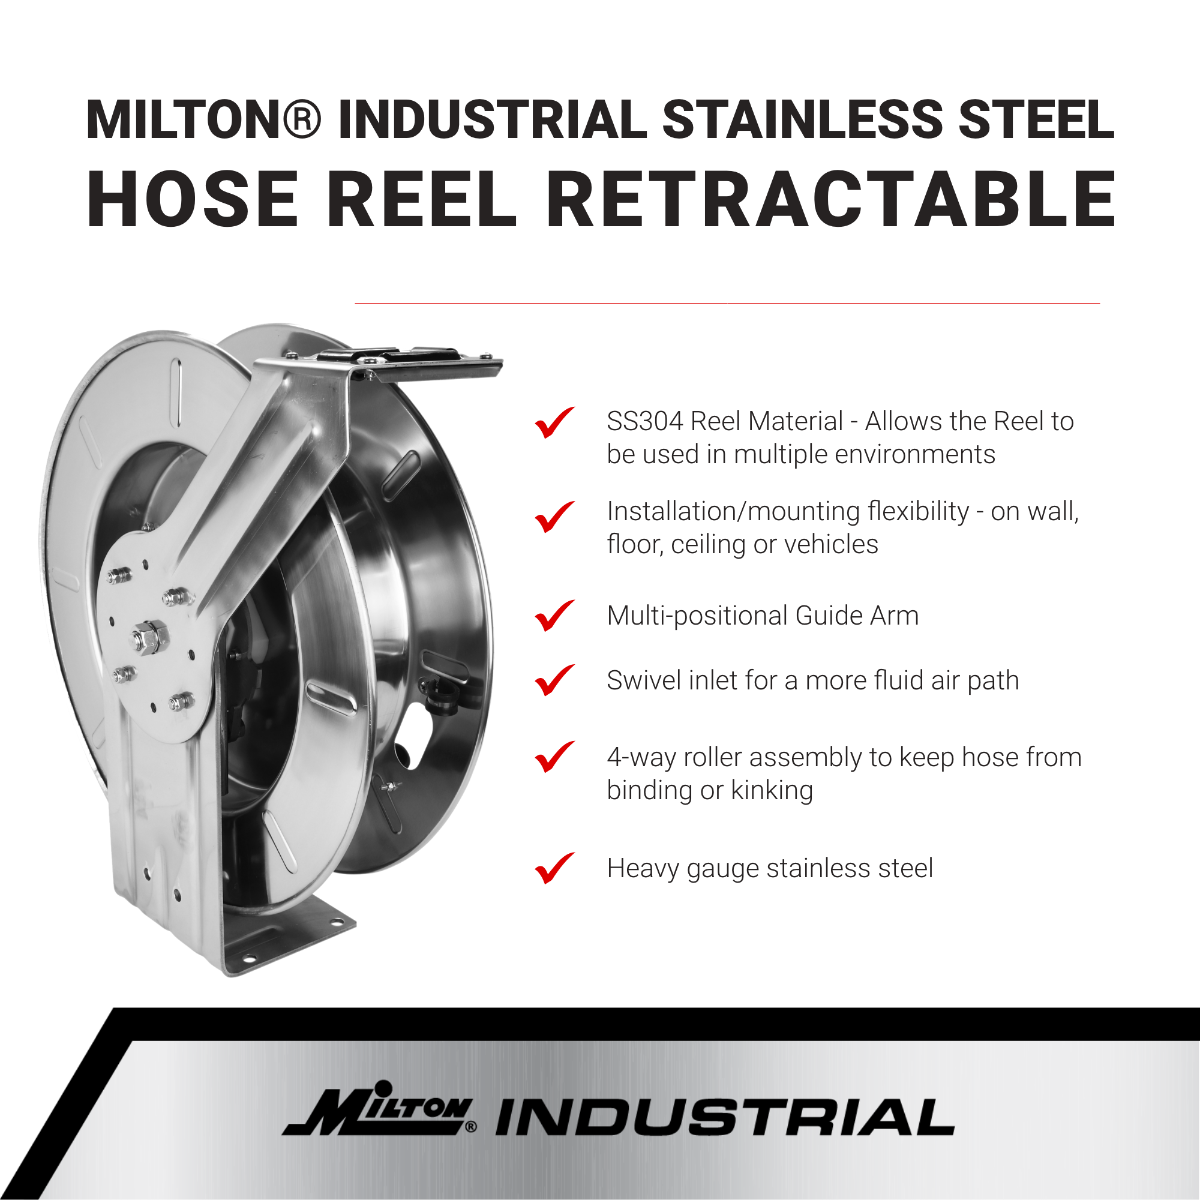 2751-2514SS - Milton® Industrial Stainless Steel Hose Reel Retractable,  1/4 ID x 25' Ultra-Lightweight Rubber Hose w/ 1/4 NPT, 300 PSI